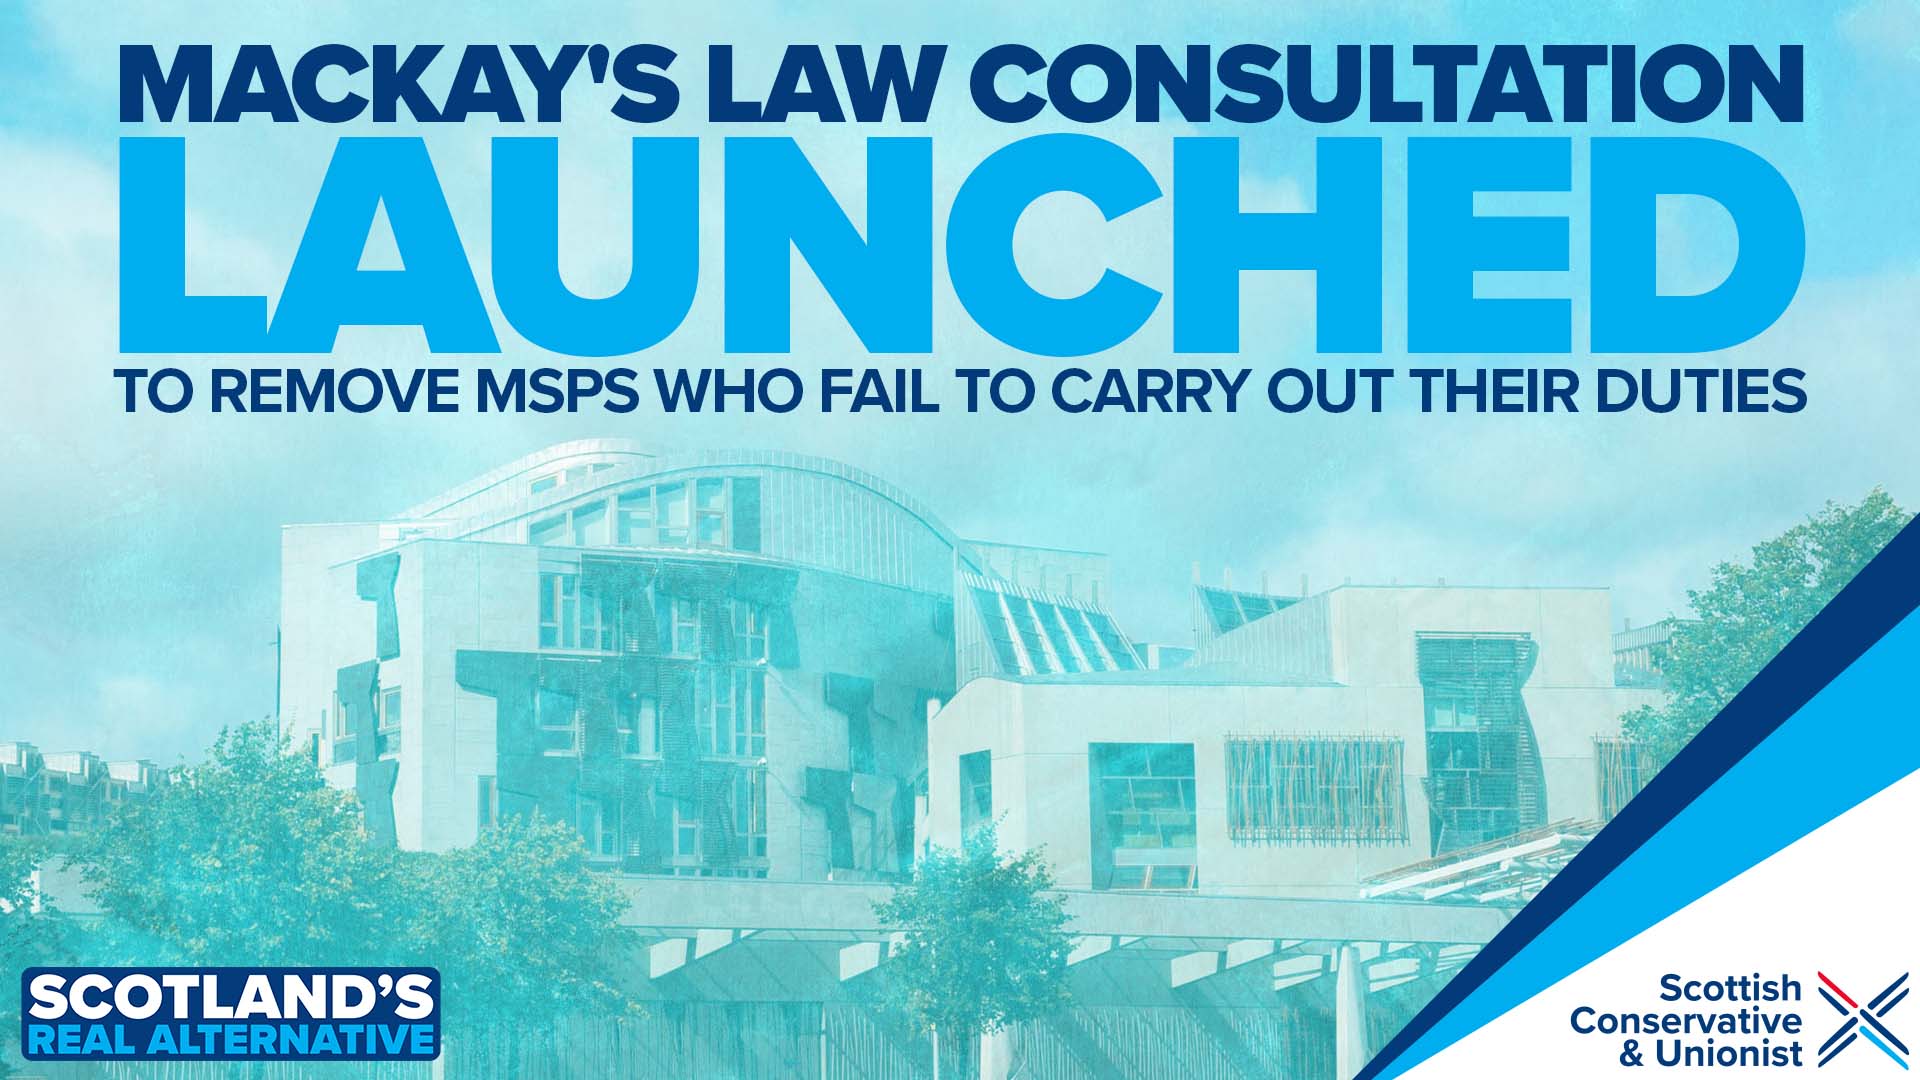 Mackays Law Launched Twitter Quick guide to key Scottish Conservative policies